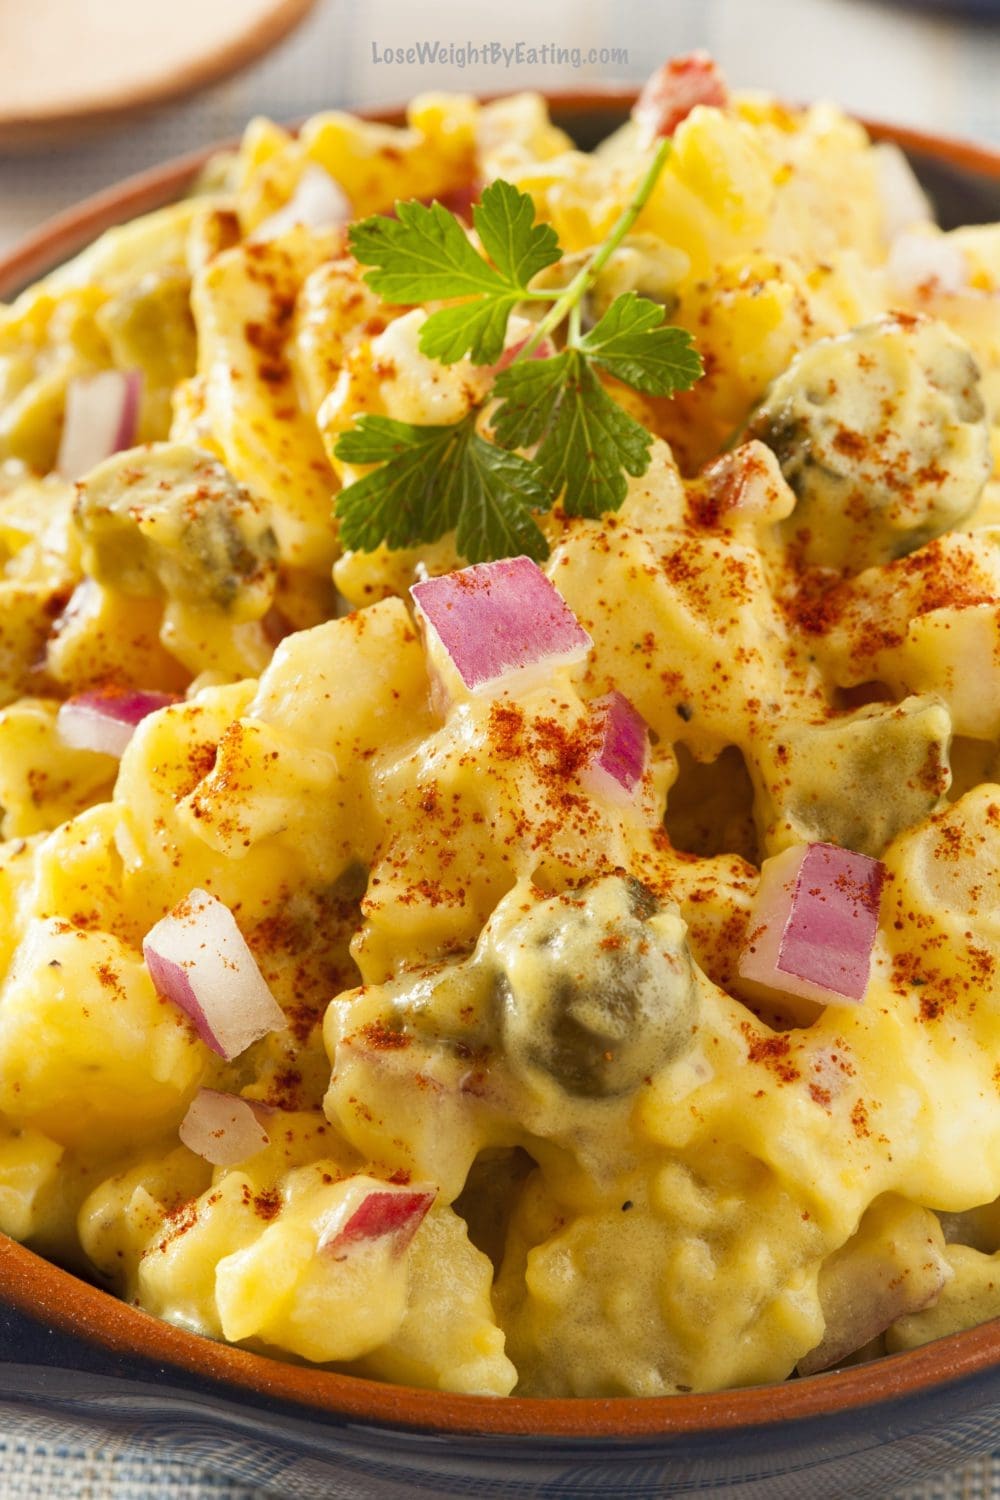 The Best Healthy Potato Salad Recipe - 10 Easy Sides for Burgers